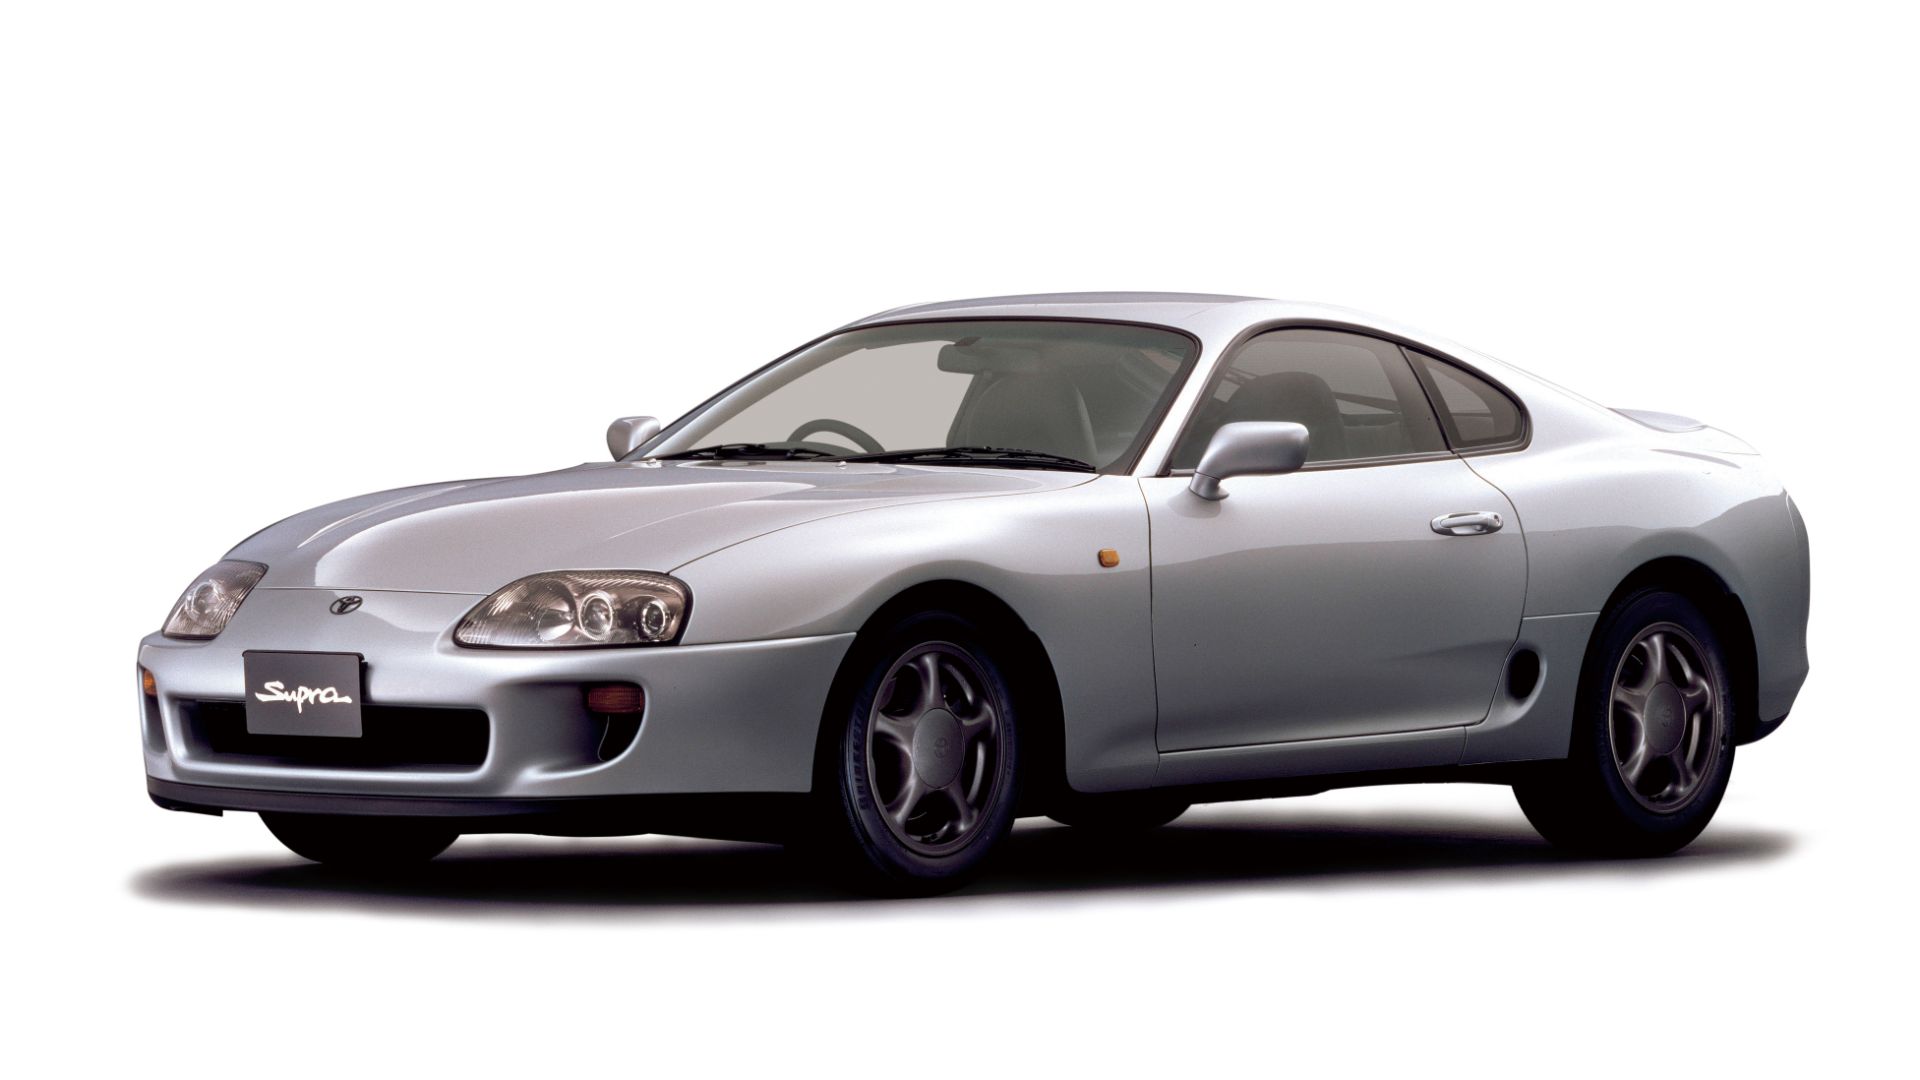 Toyota is making parts for the classic Supra again